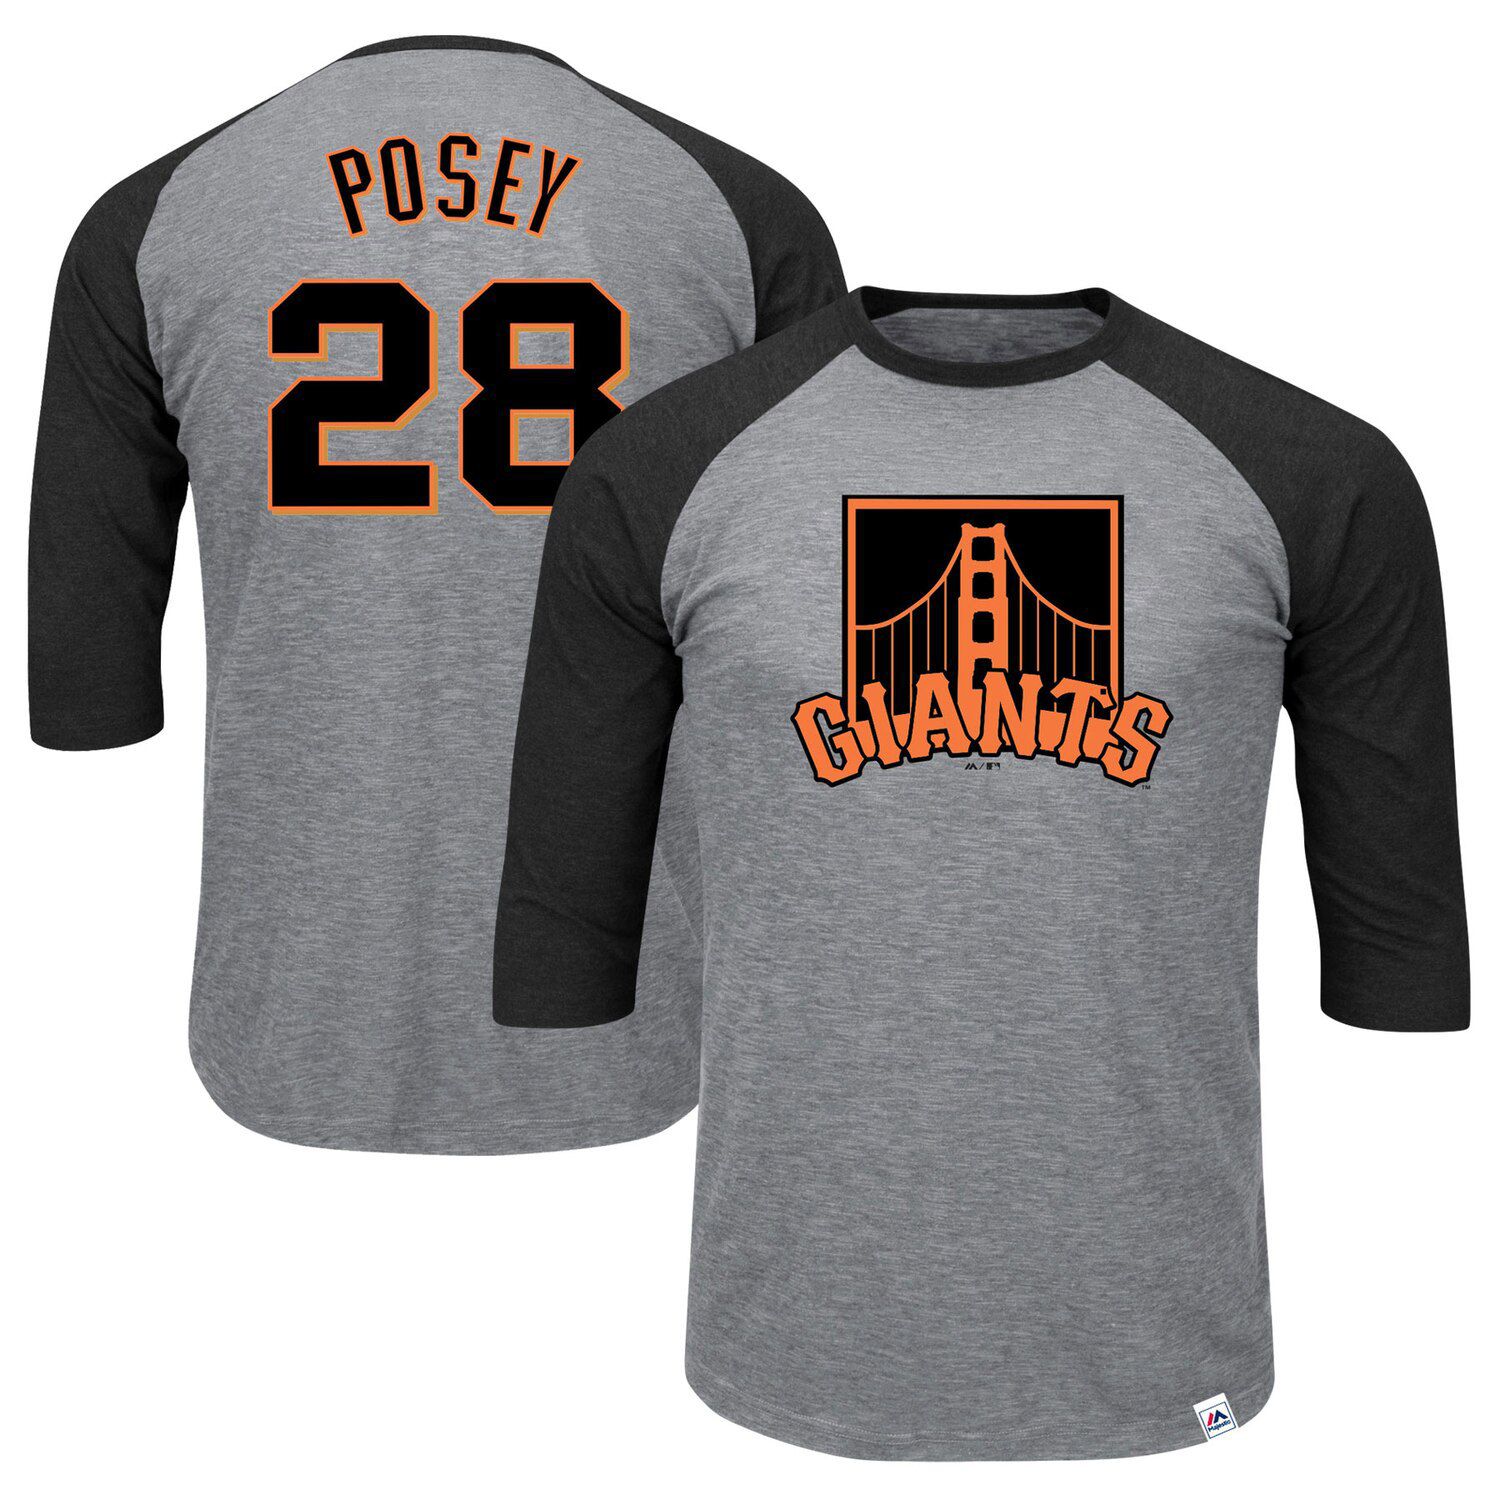 Buster Posey Heathered Gray/Black 